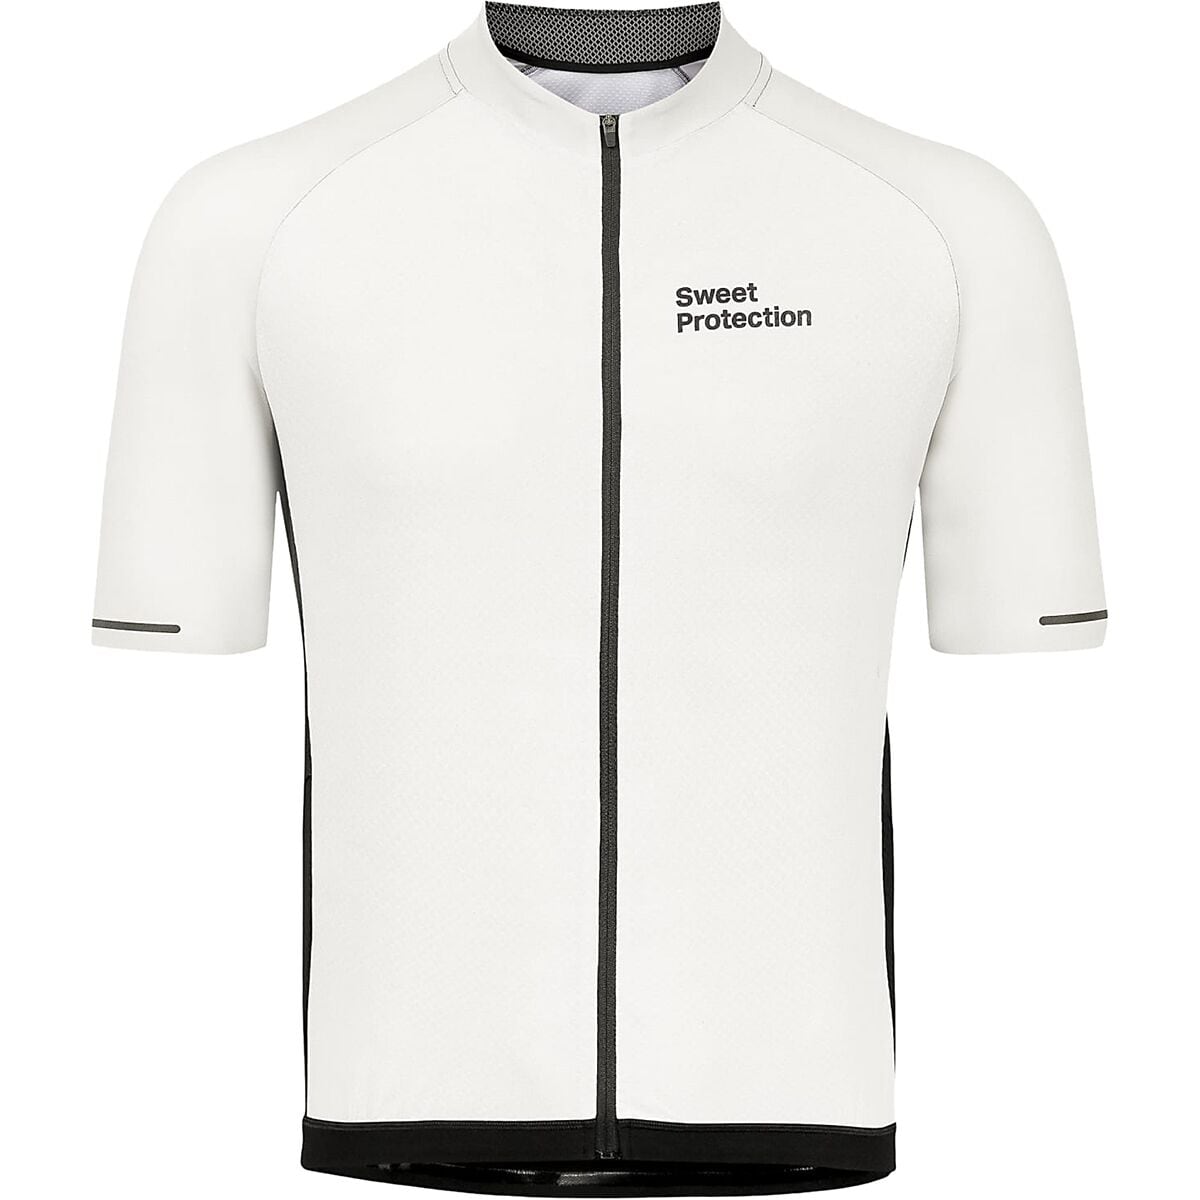 Sweet Protection Crossfire Jersey - Men's